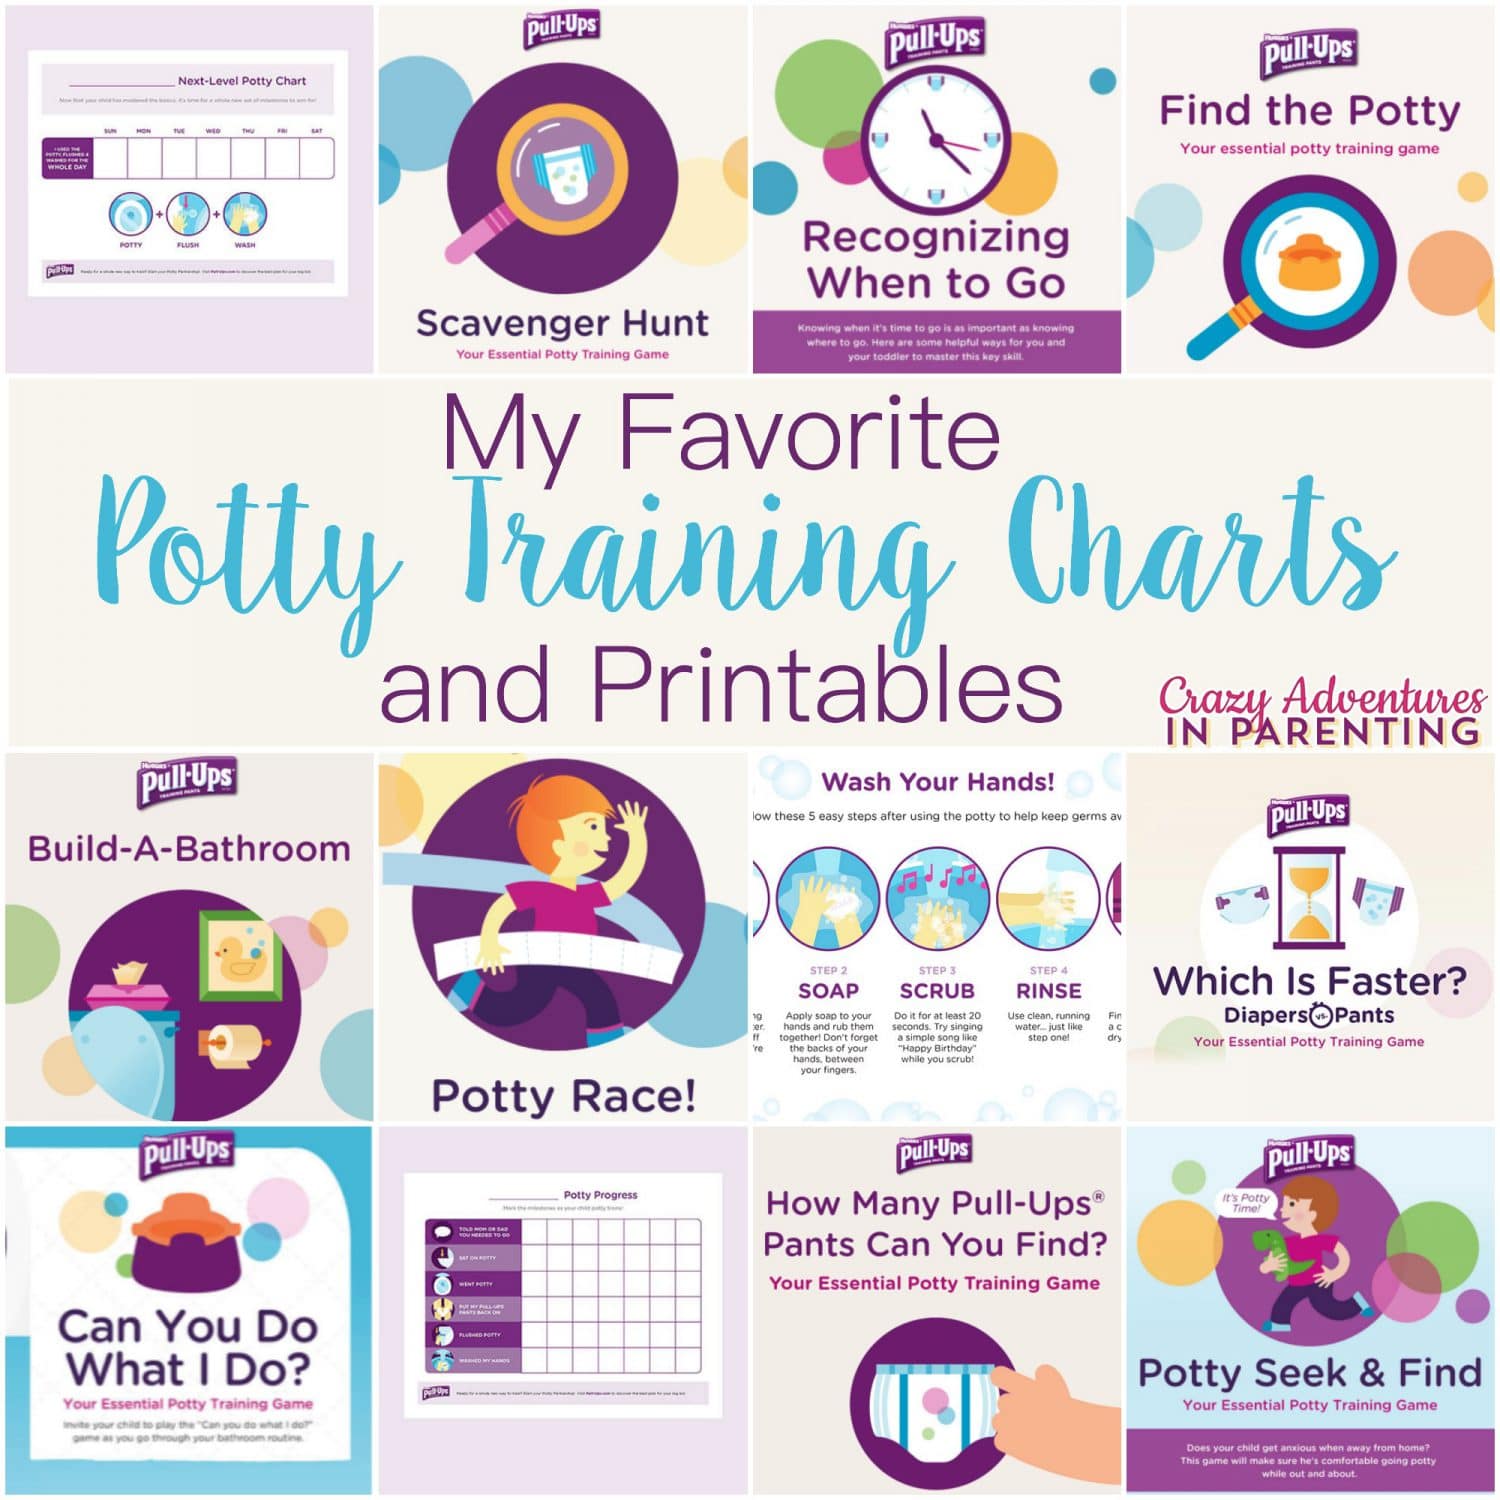 My Favorite Potty Training Charts and Printables